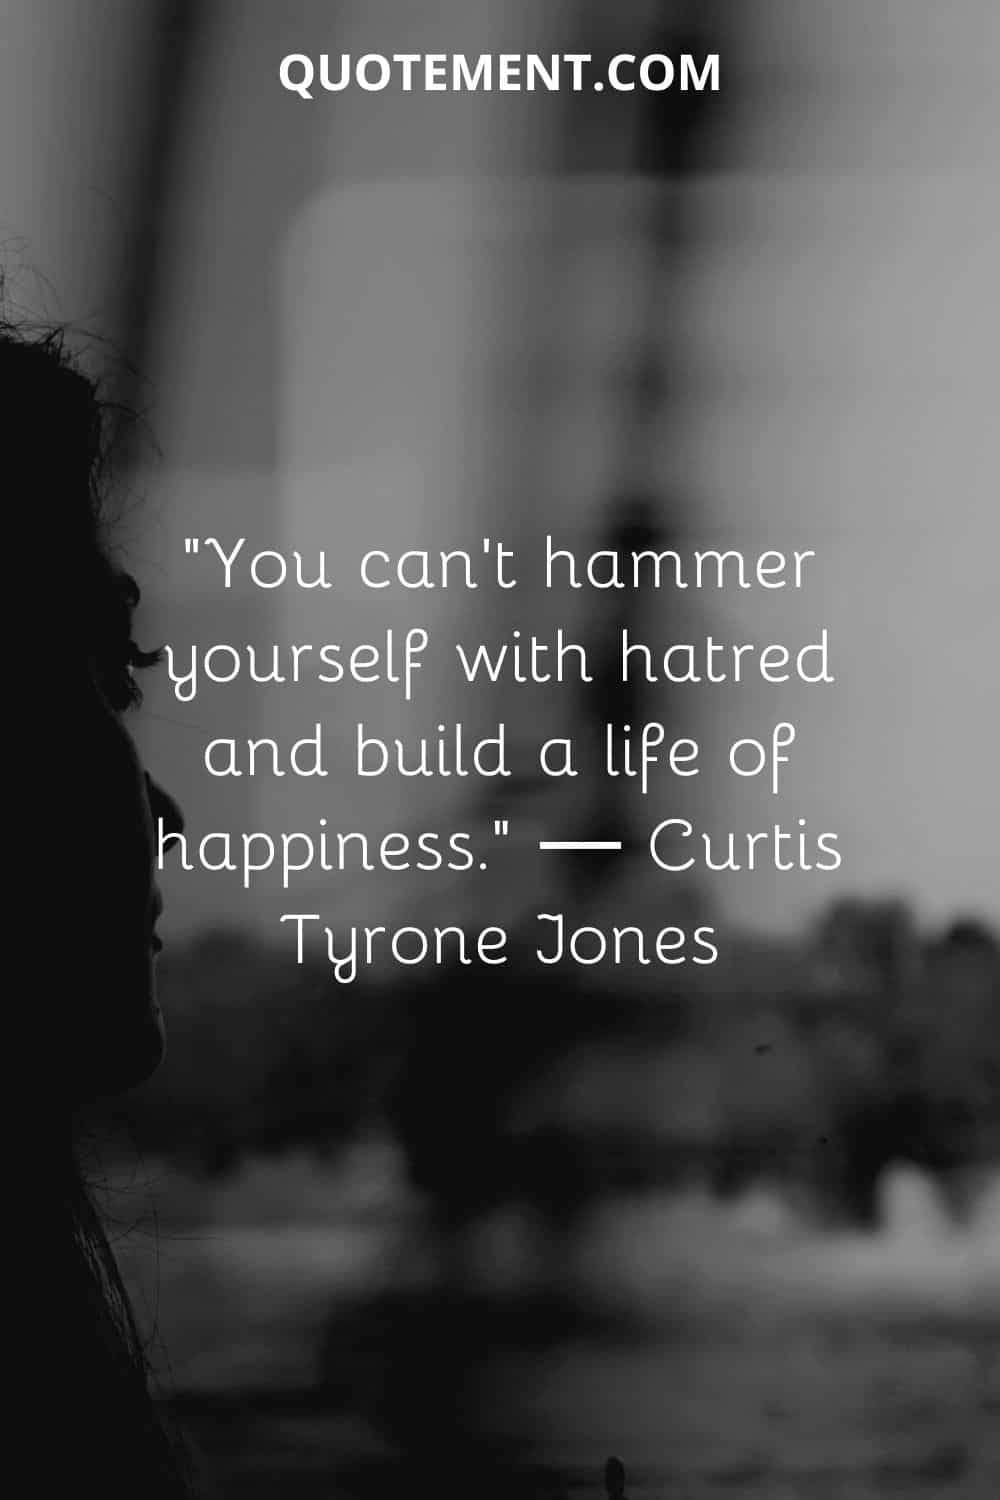 You can’t hammer yourself with hatred and build a life of happiness